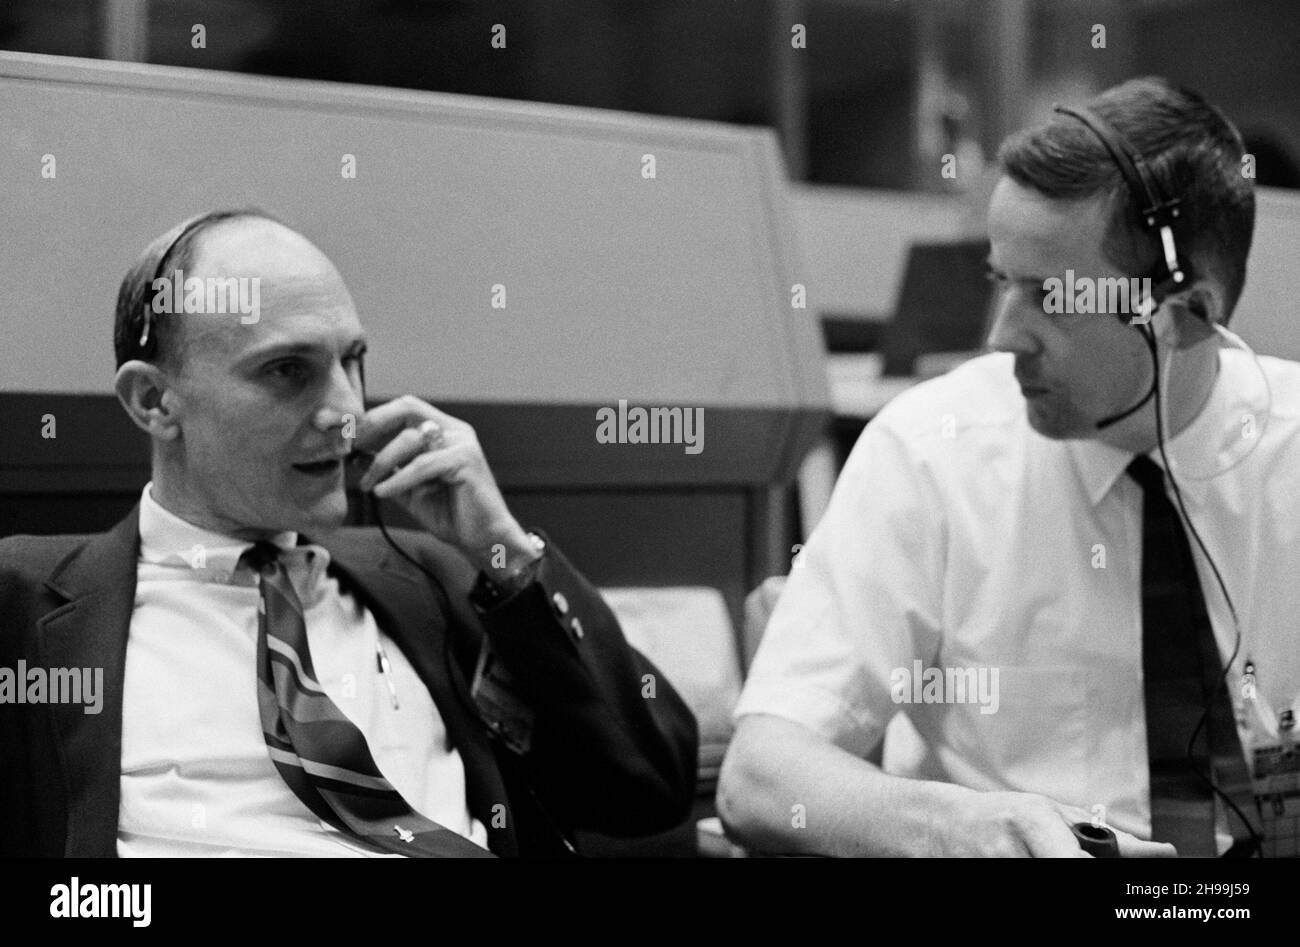 Astronaut Thomas K. (Ken) Mattingly II, who was scheduled as a prime crew member for the Apollo 13 lunar landing mission but was replaced in the final hours when it was discovered he had been exposed to measles, watches the liftoff phase of the mission. He is seated at a console in the Mission Control Center’s (MCC) Mission Operations Control Room (MOCR). Scientist-astronaut Joseph P. Kerwin, a spacecraft communicator for the mission, looks on at right. Stock Photo